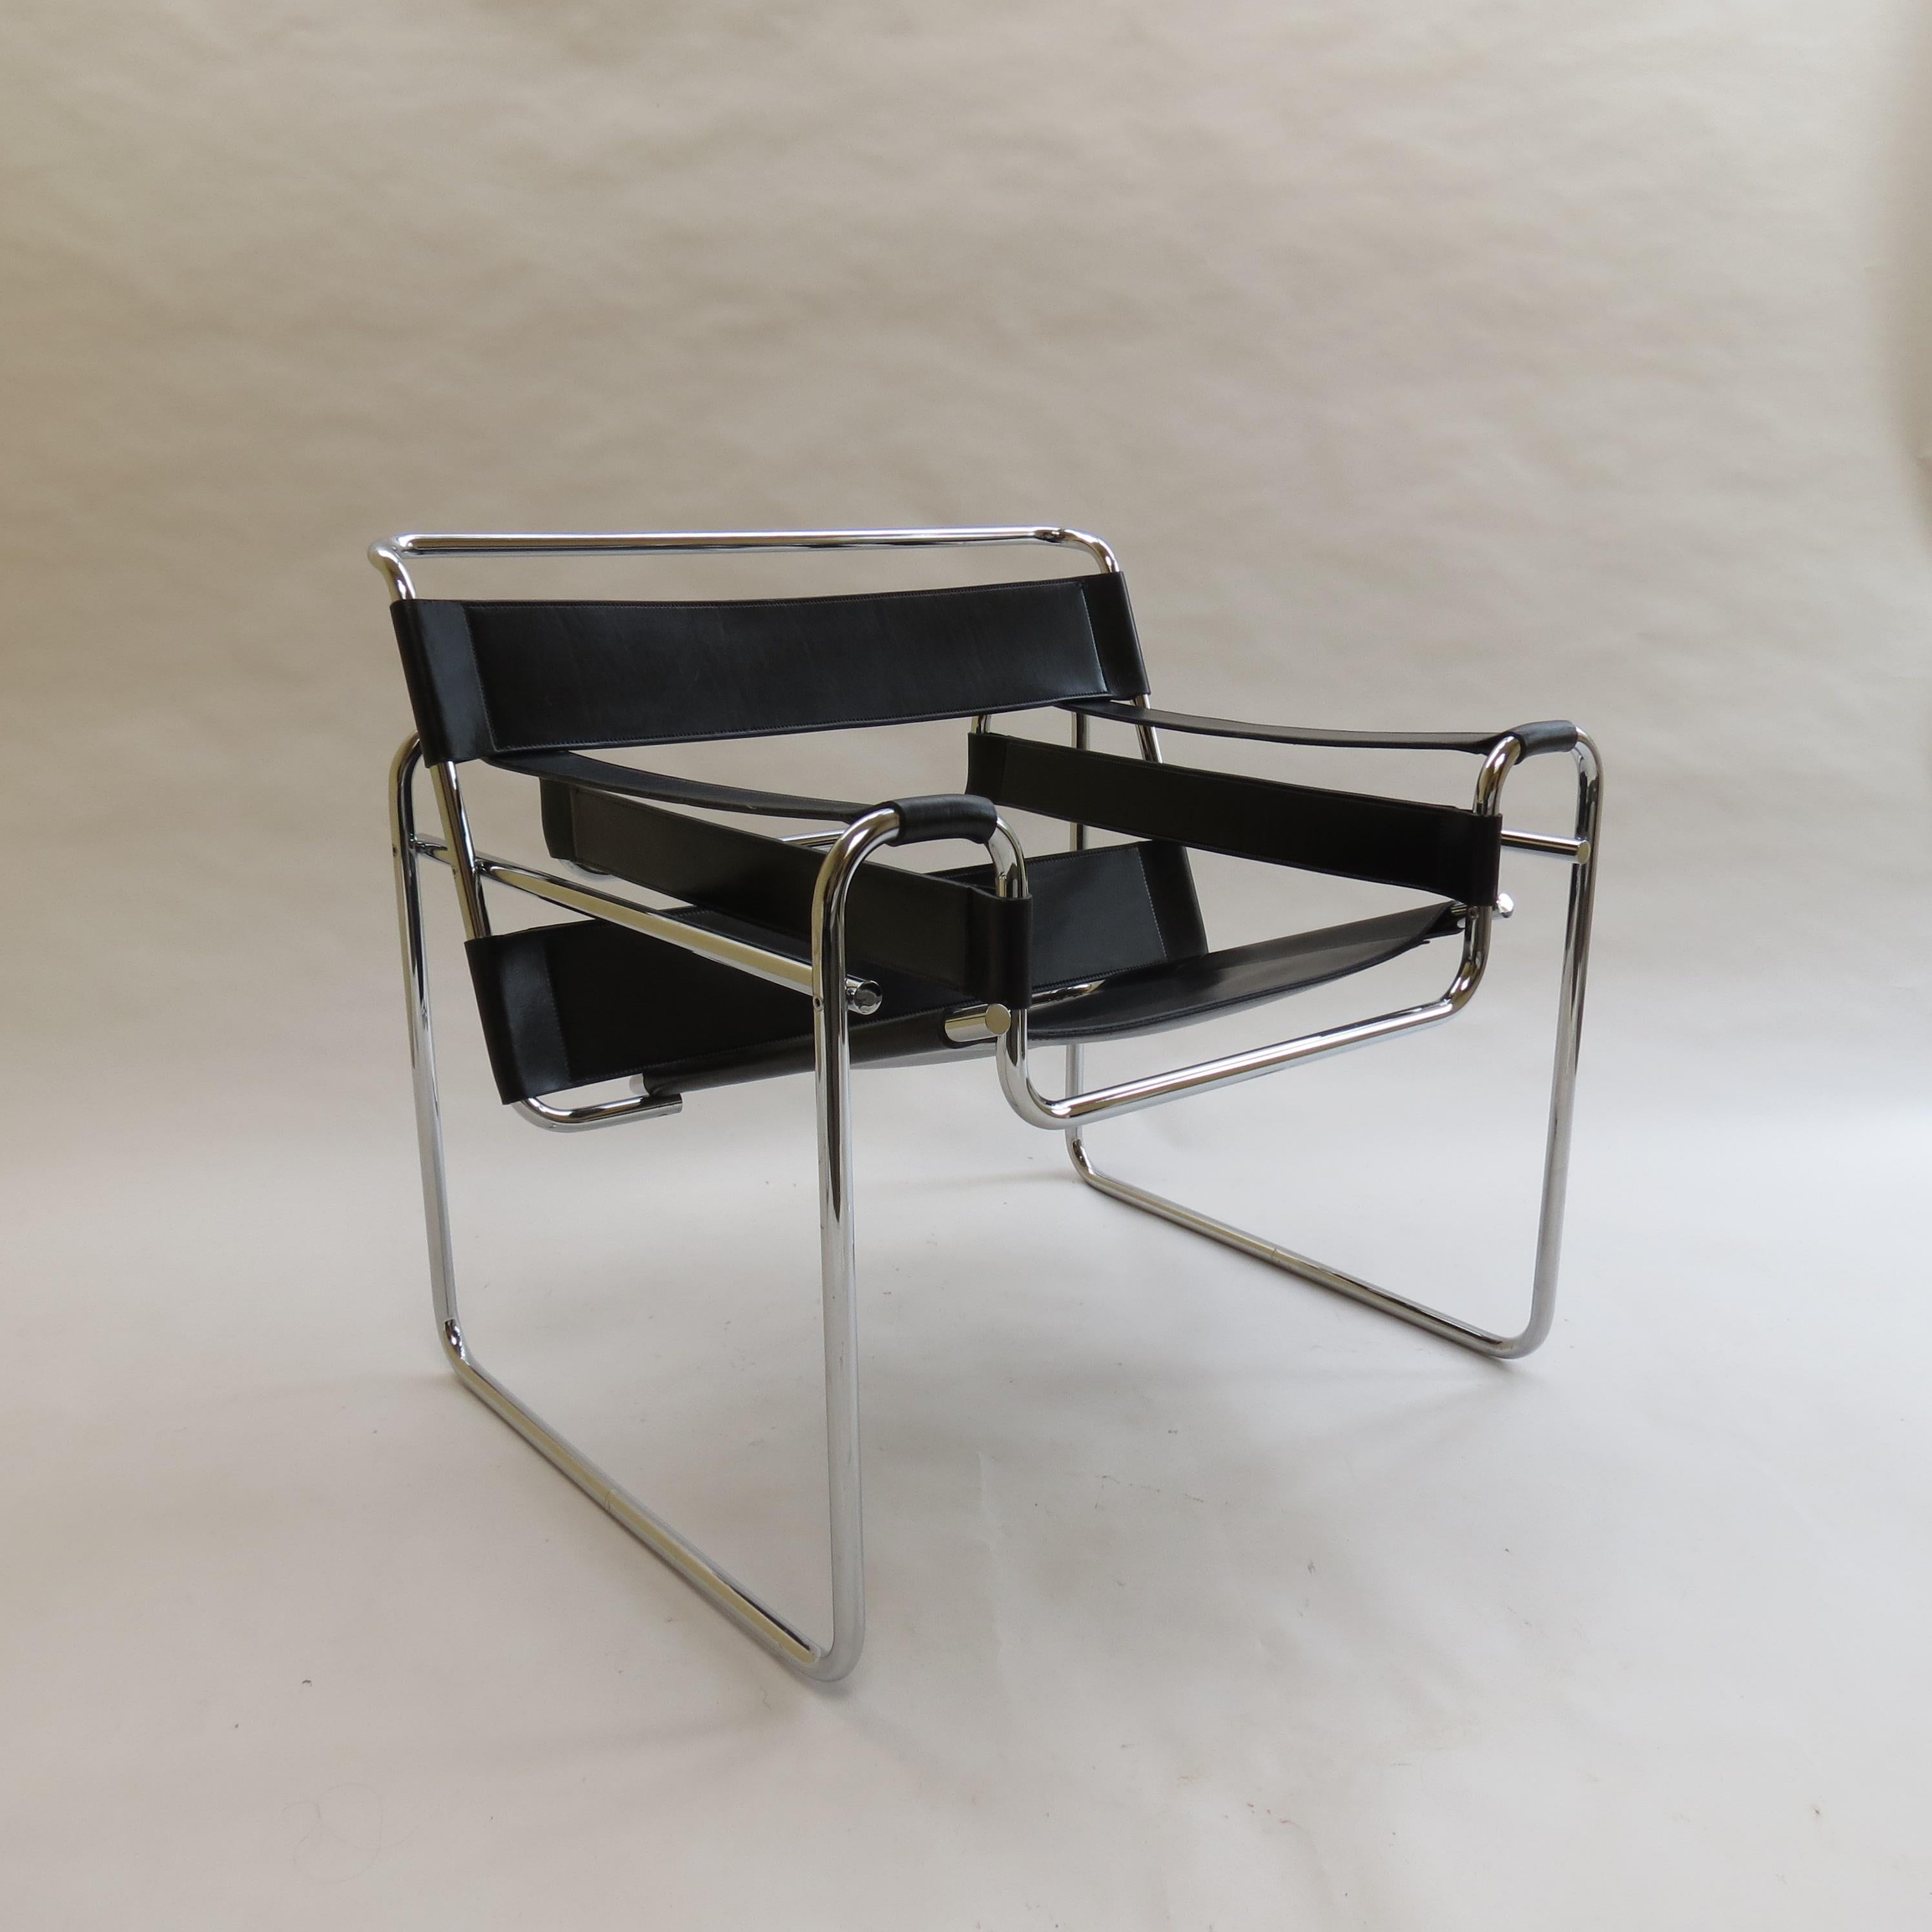 Wassily chair designed by Marcel Breuer and manufactured by Knoll. The original year of design of this chair was 1925, these particular chairs were manufactured in the early 1970s.
Made from polished chrome tube with leather seat and arms. The